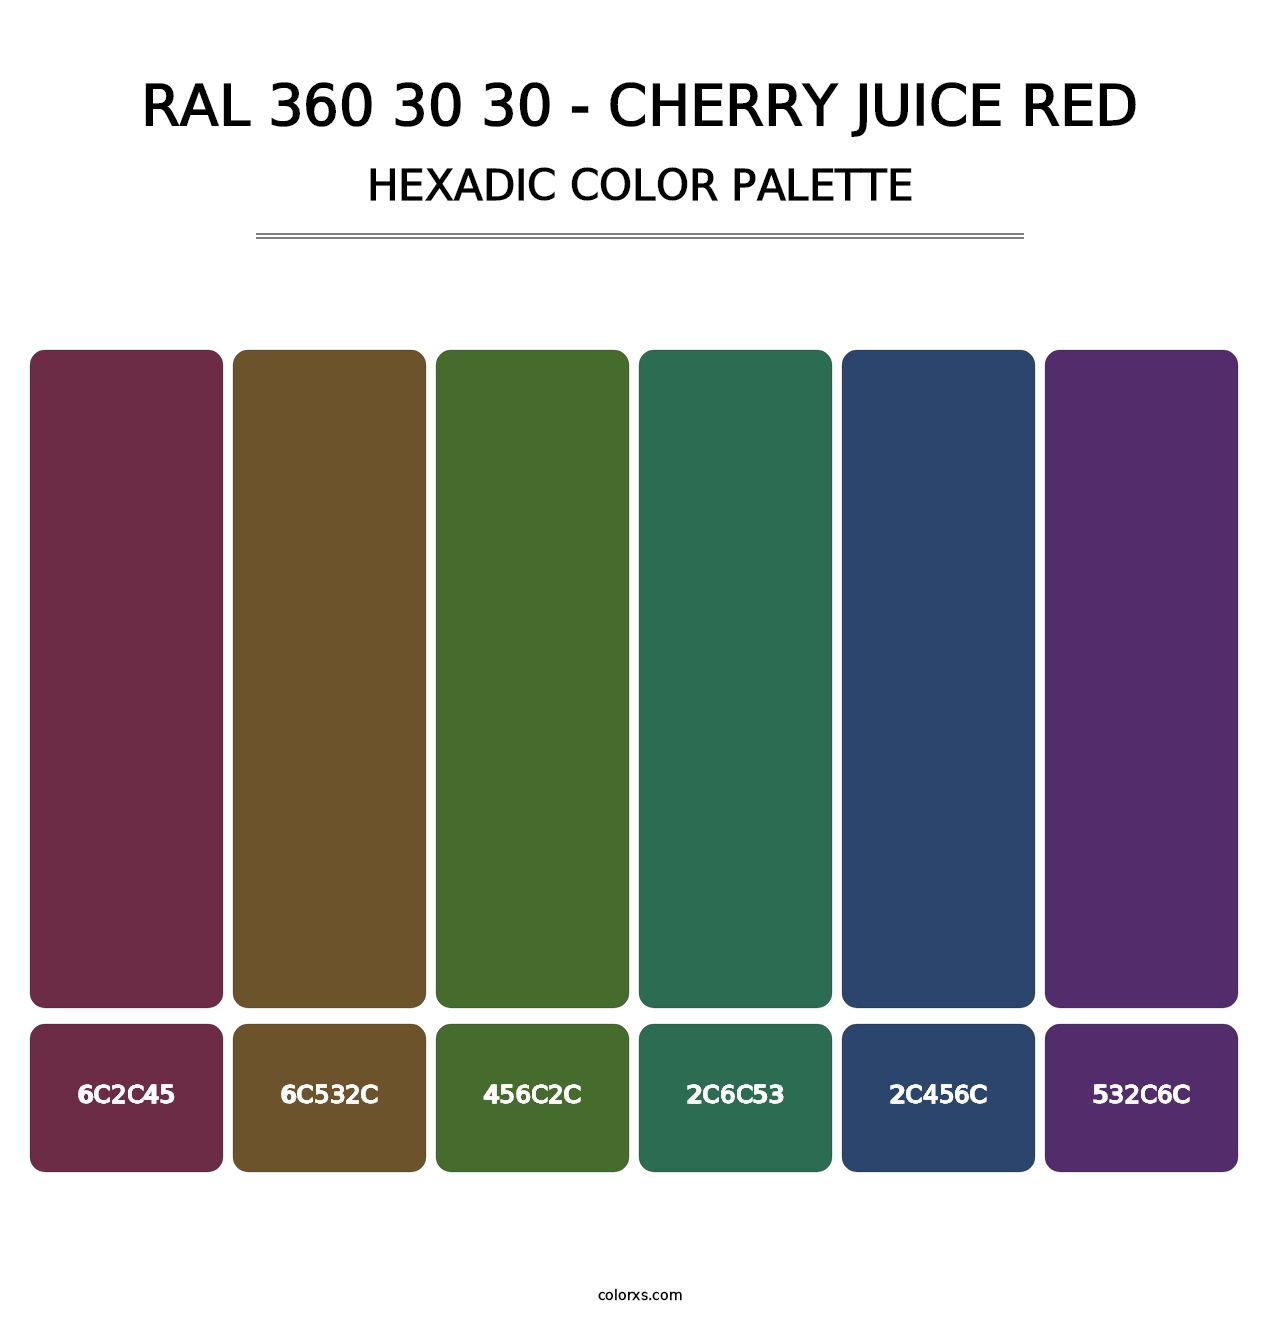 RAL 360 30 30 - Cherry Juice Red - Hexadic Color Palette